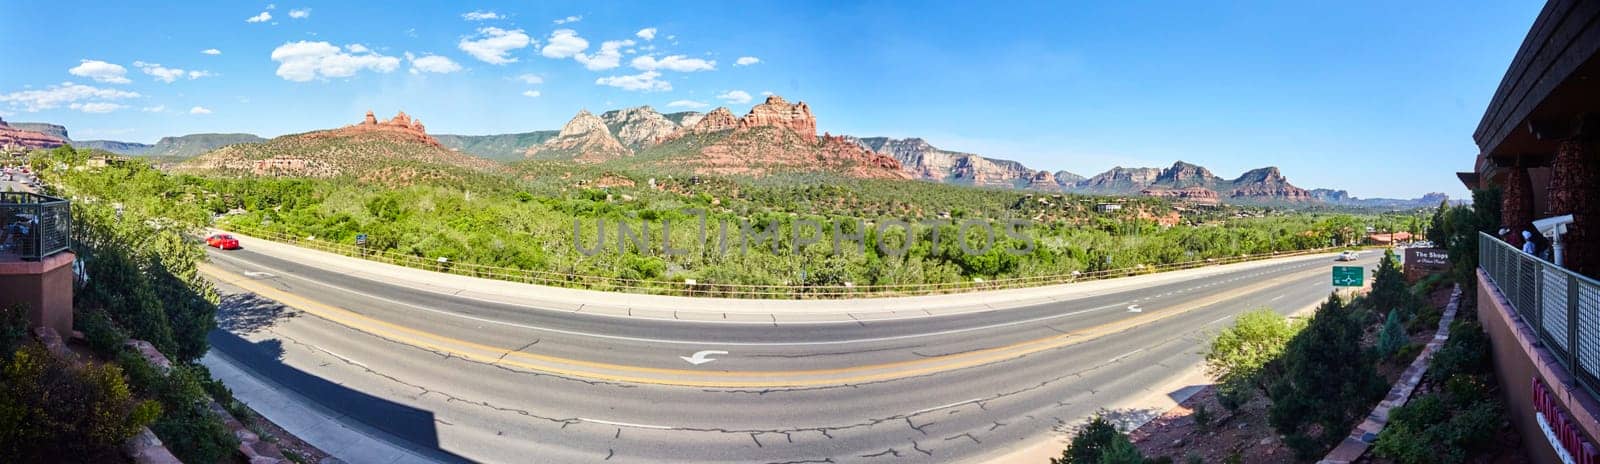 Sedona Panorama: Serene Highway View with Red Rock Formations and Blue Sky in Arizona, 2016